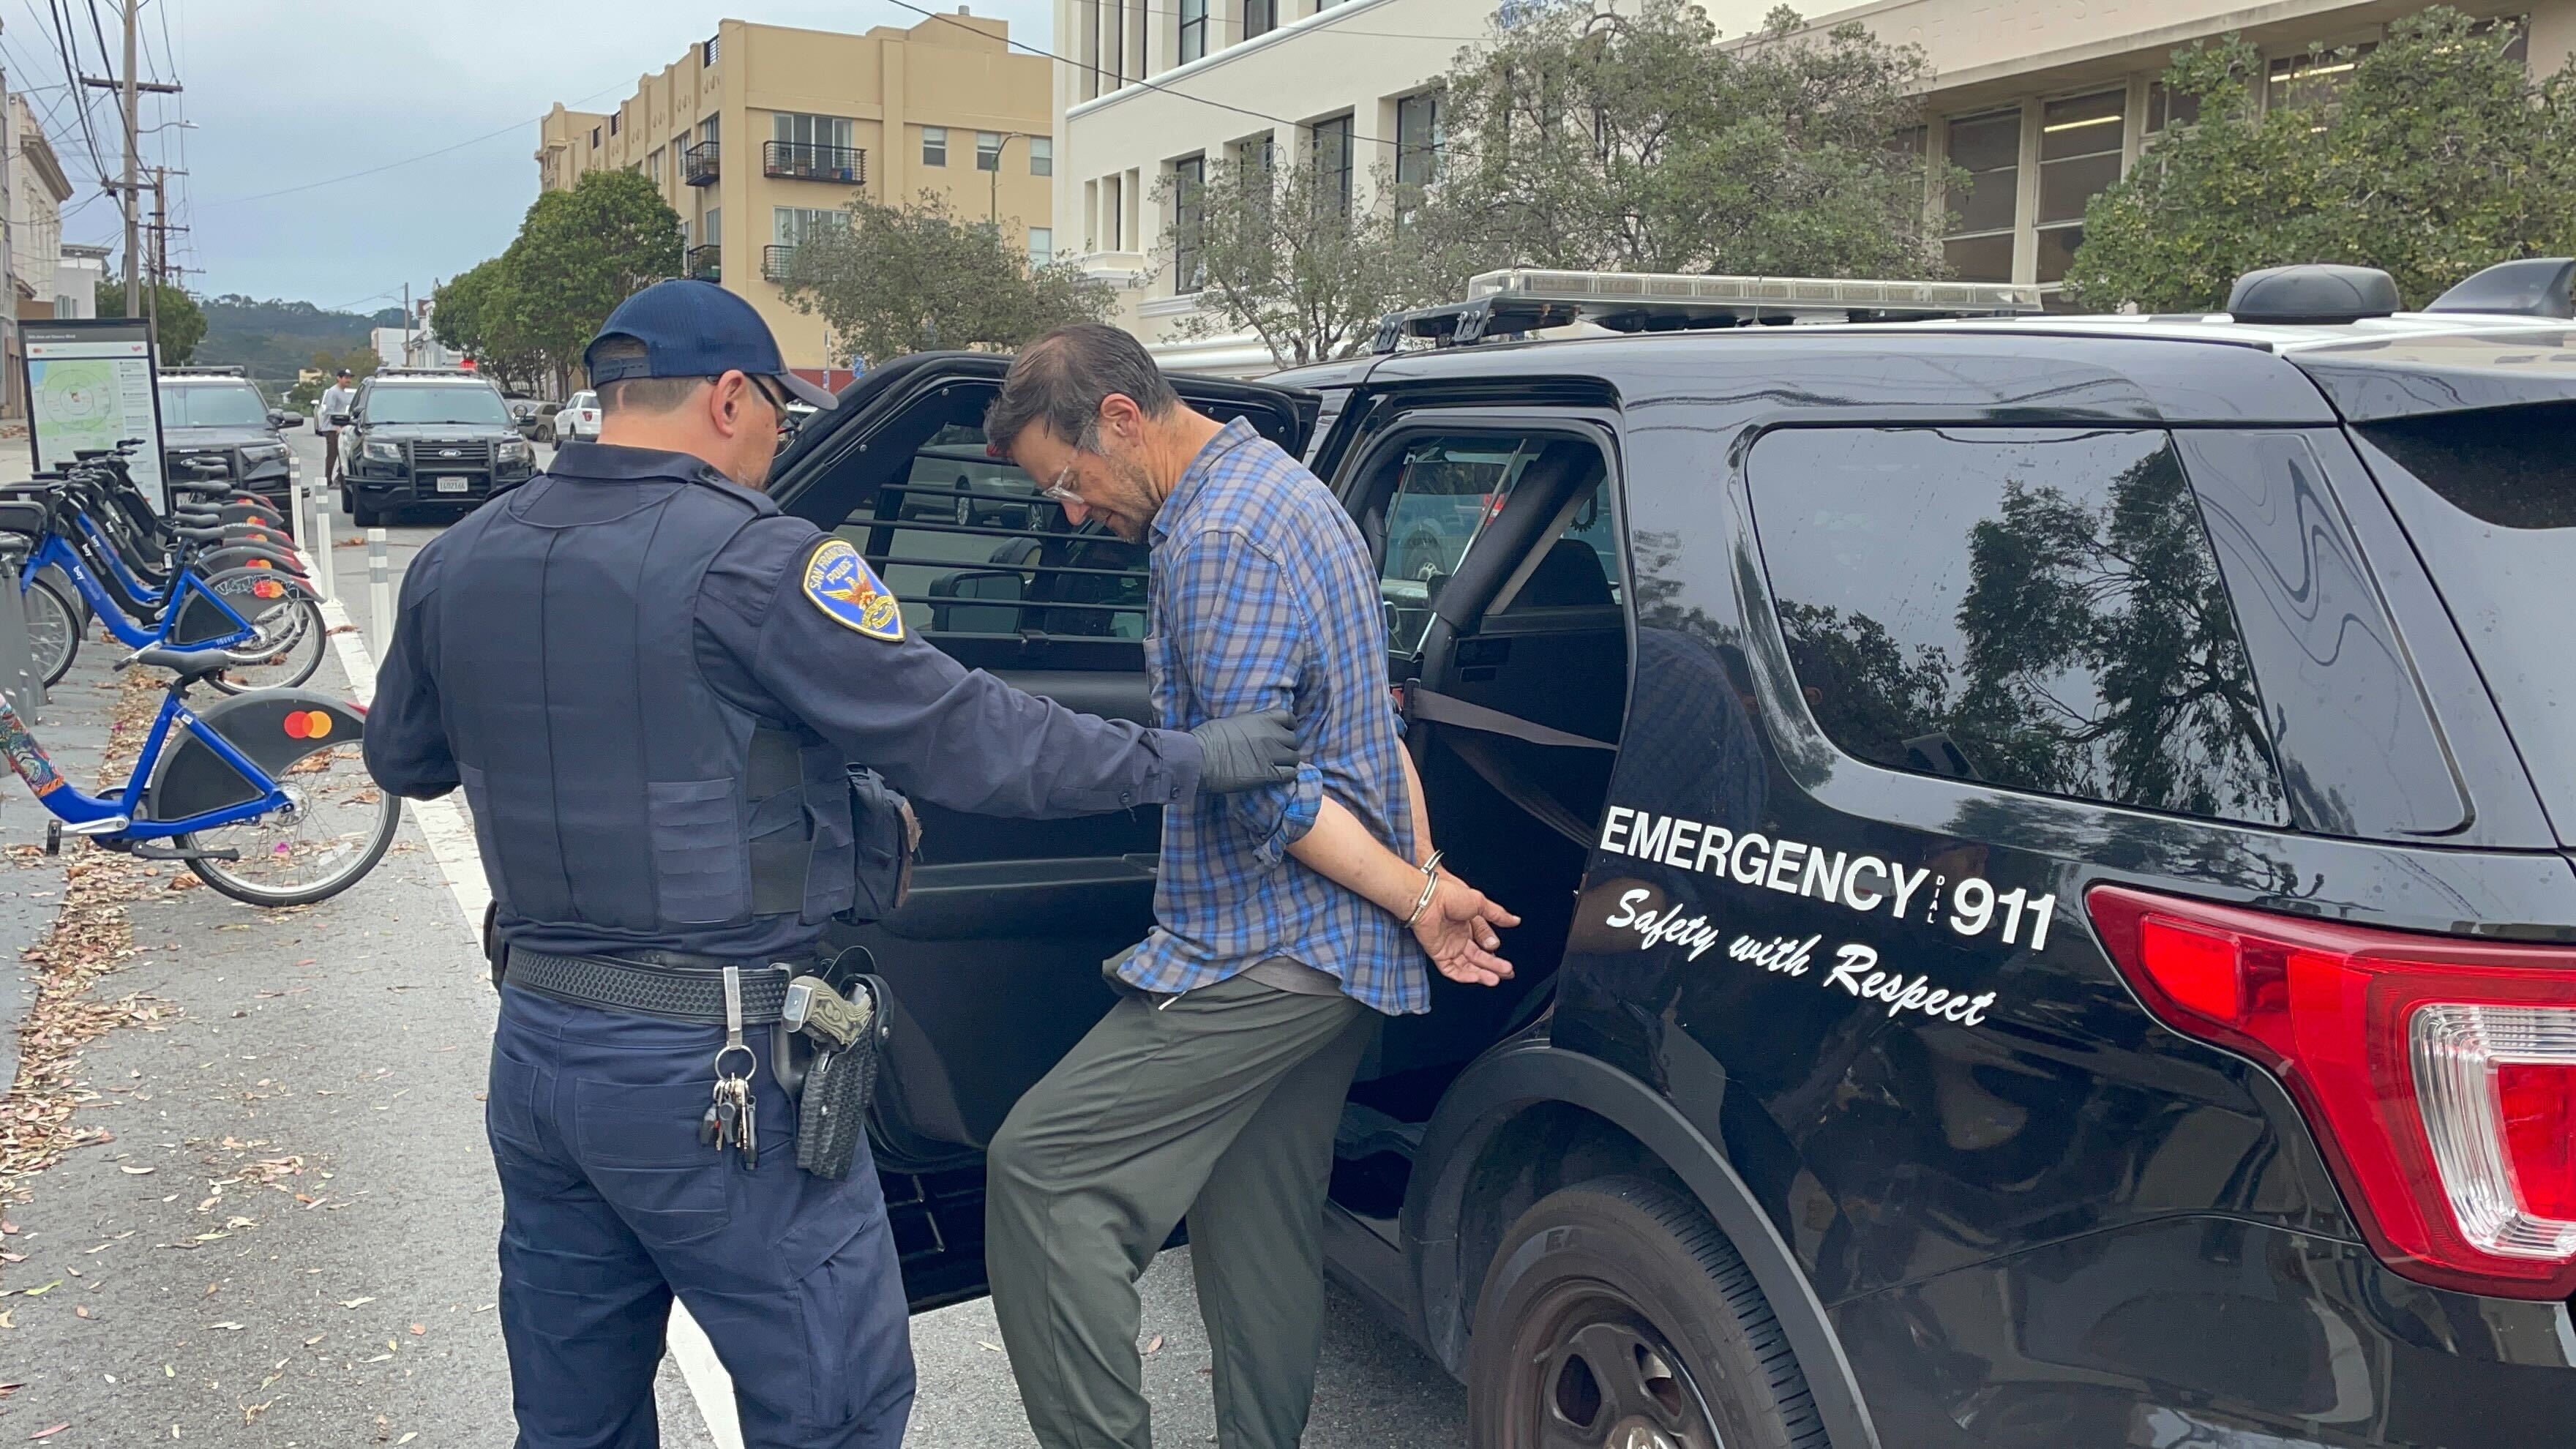 A man is arrested by police.